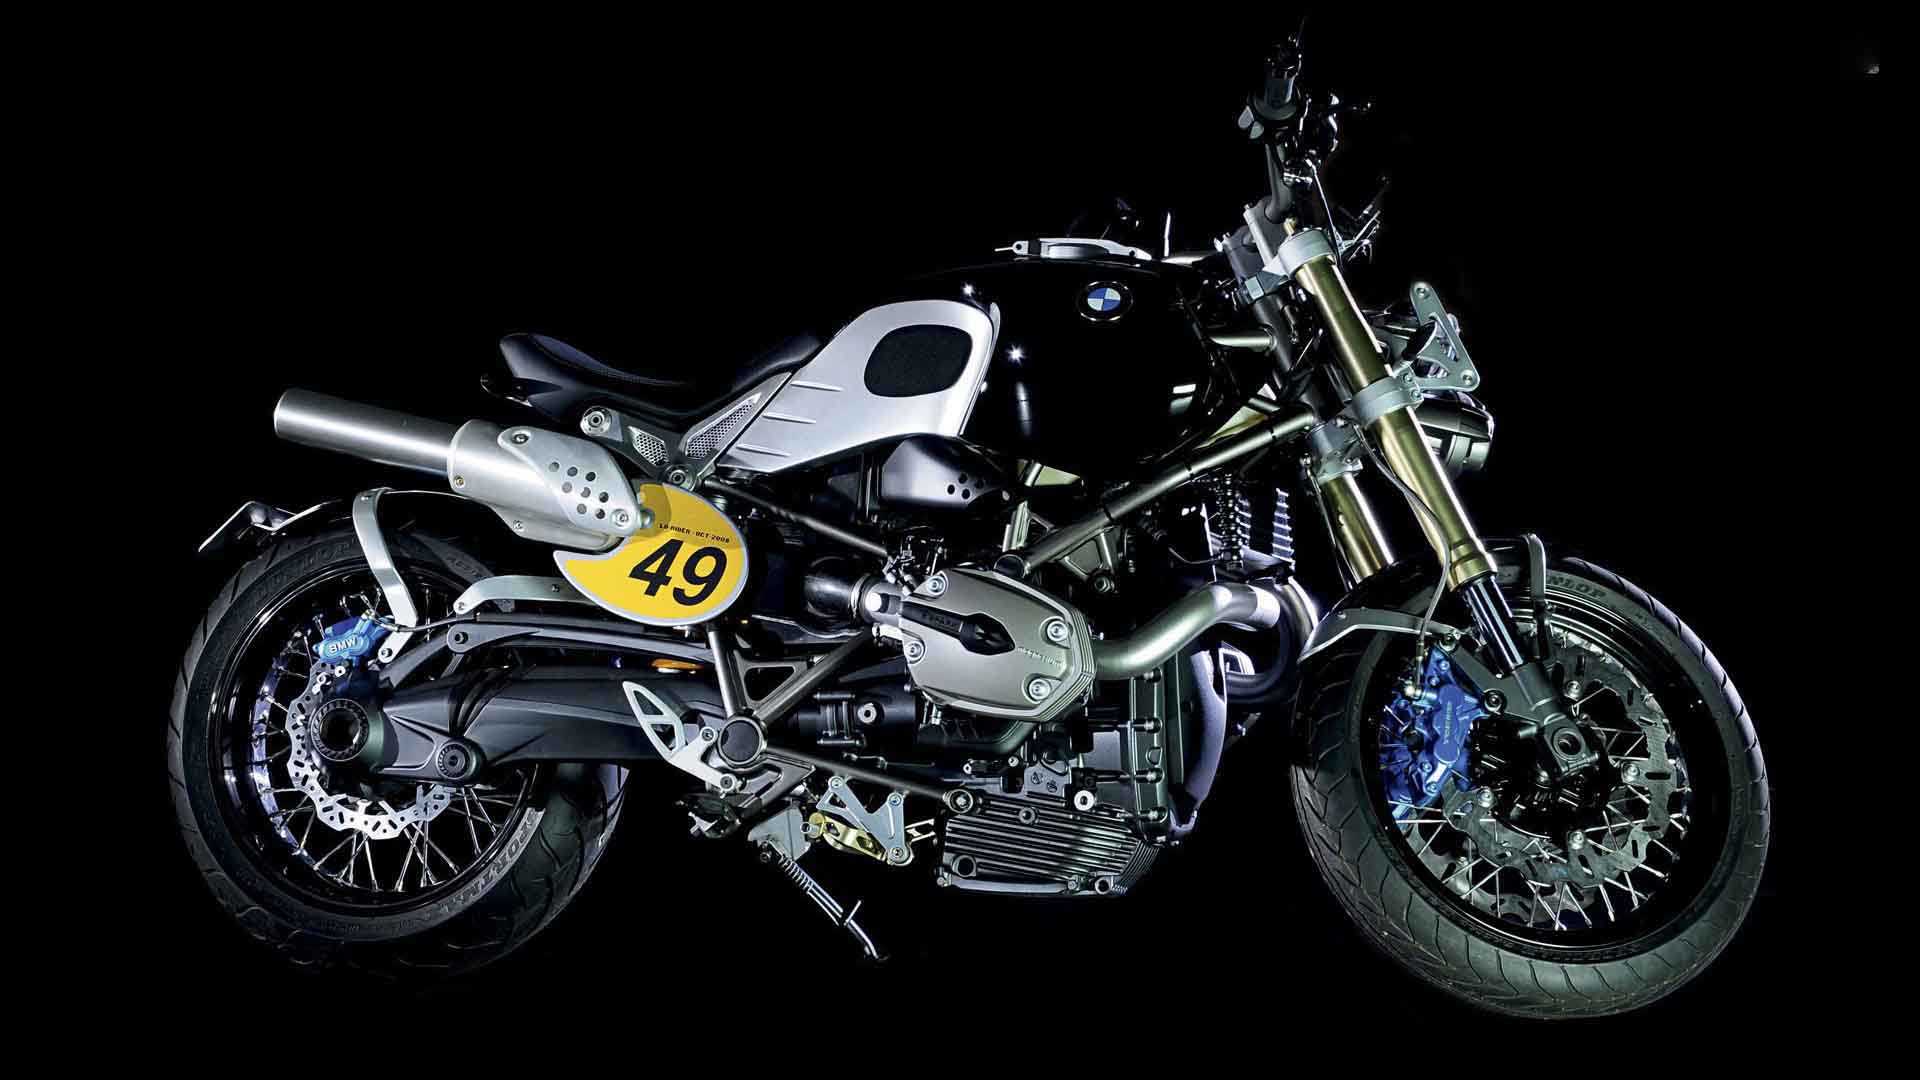 BMW Motorcycles Wallpaper, Get Free top quality BMW Motorcycles